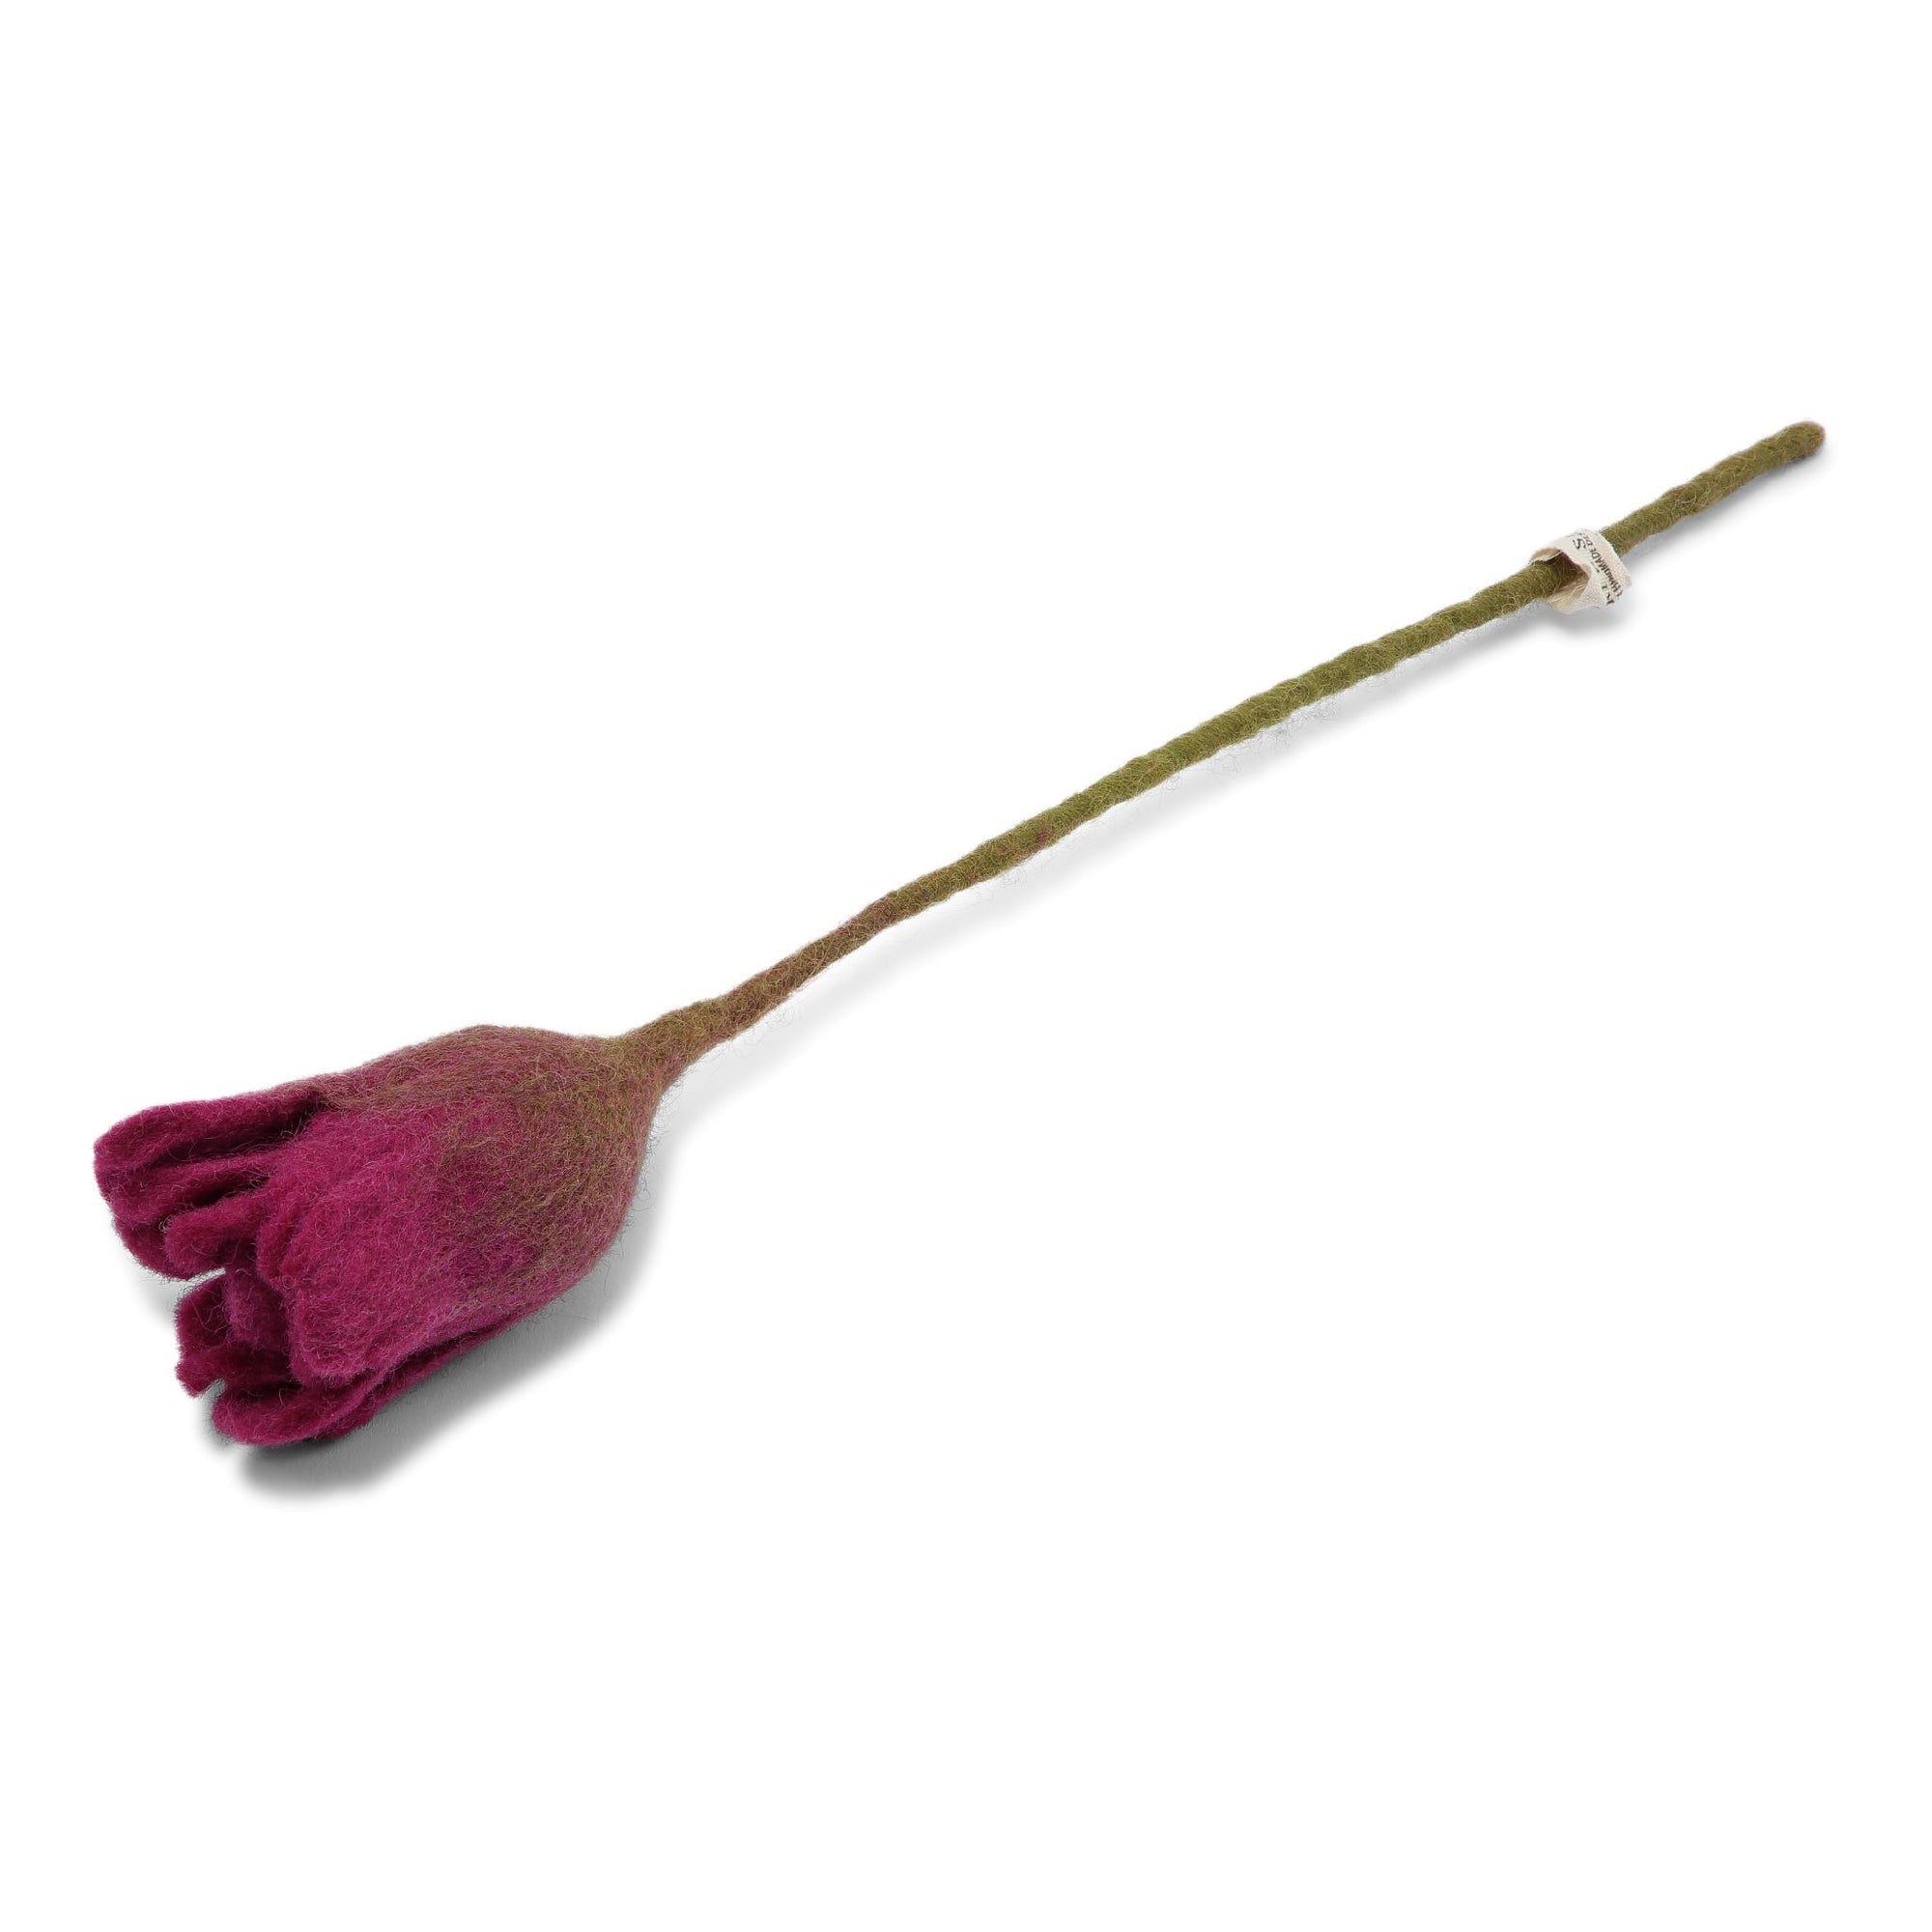 Cerise Red wool felted tulip with green felted stem.